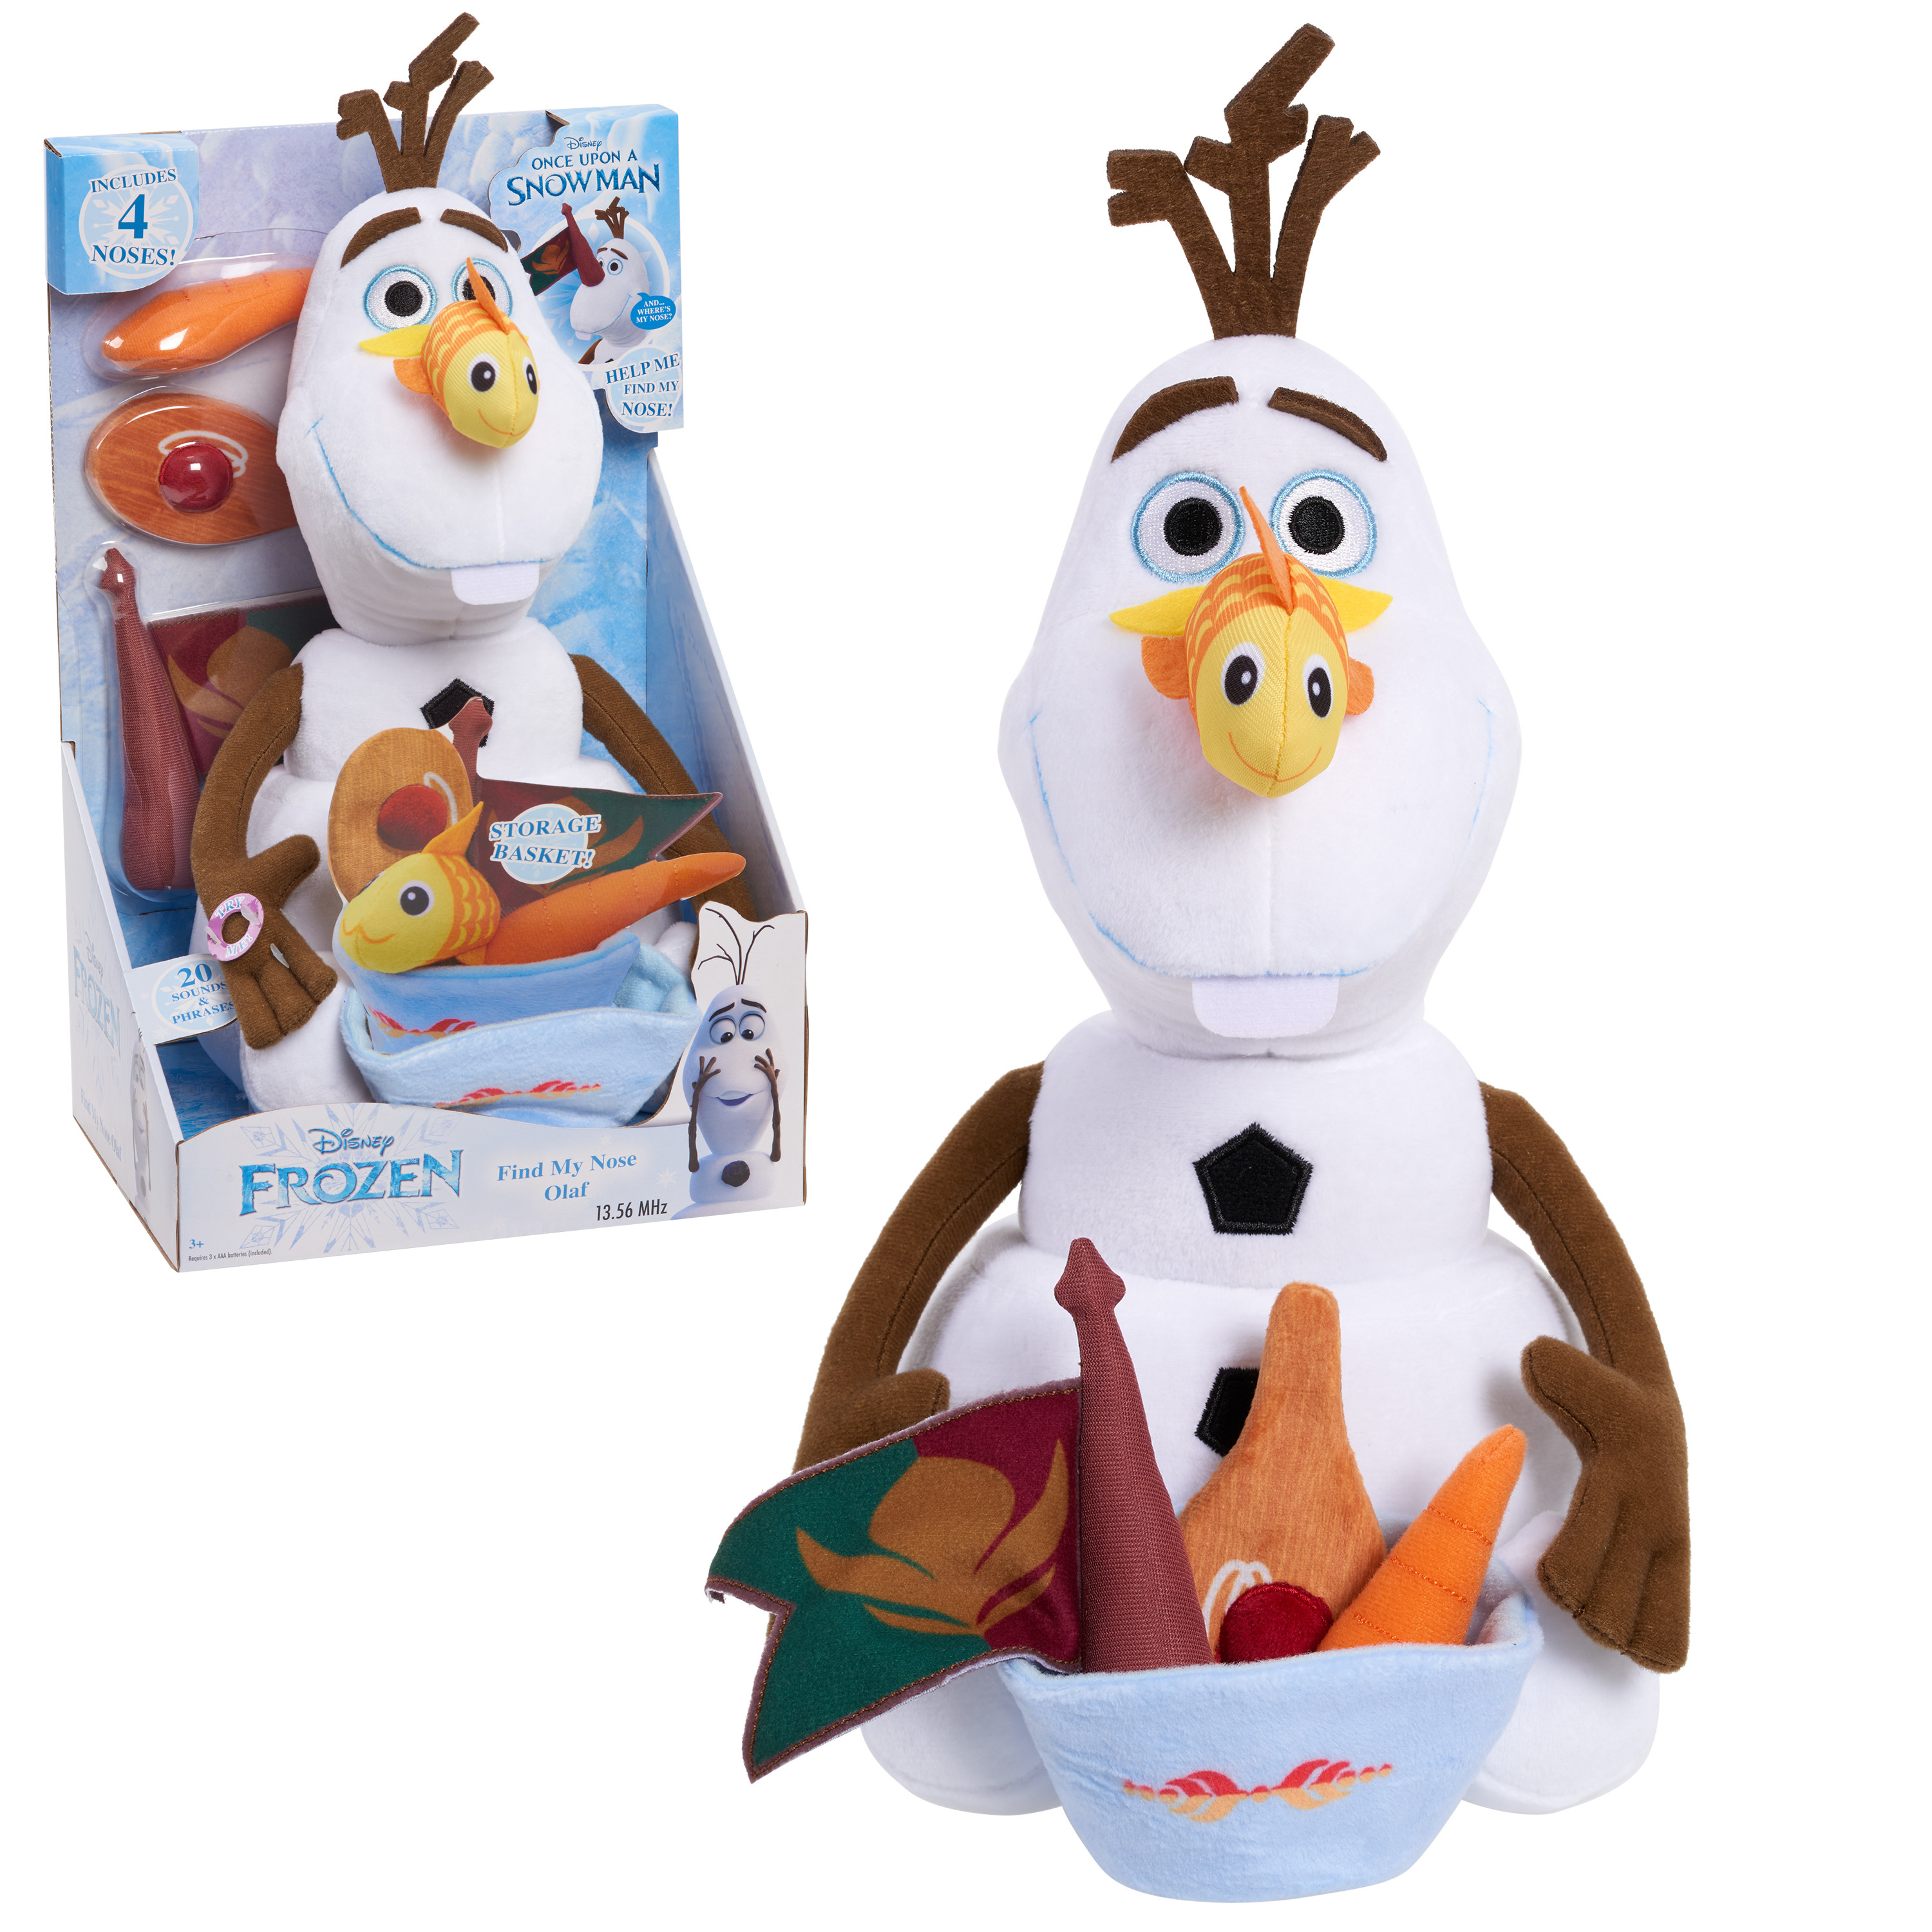 Disney Frozen Find My Nose 14-inch Olaf Plush, Officially Licensed Kids Toys for Ages 3 Up, Gifts and Presents - image 1 of 4